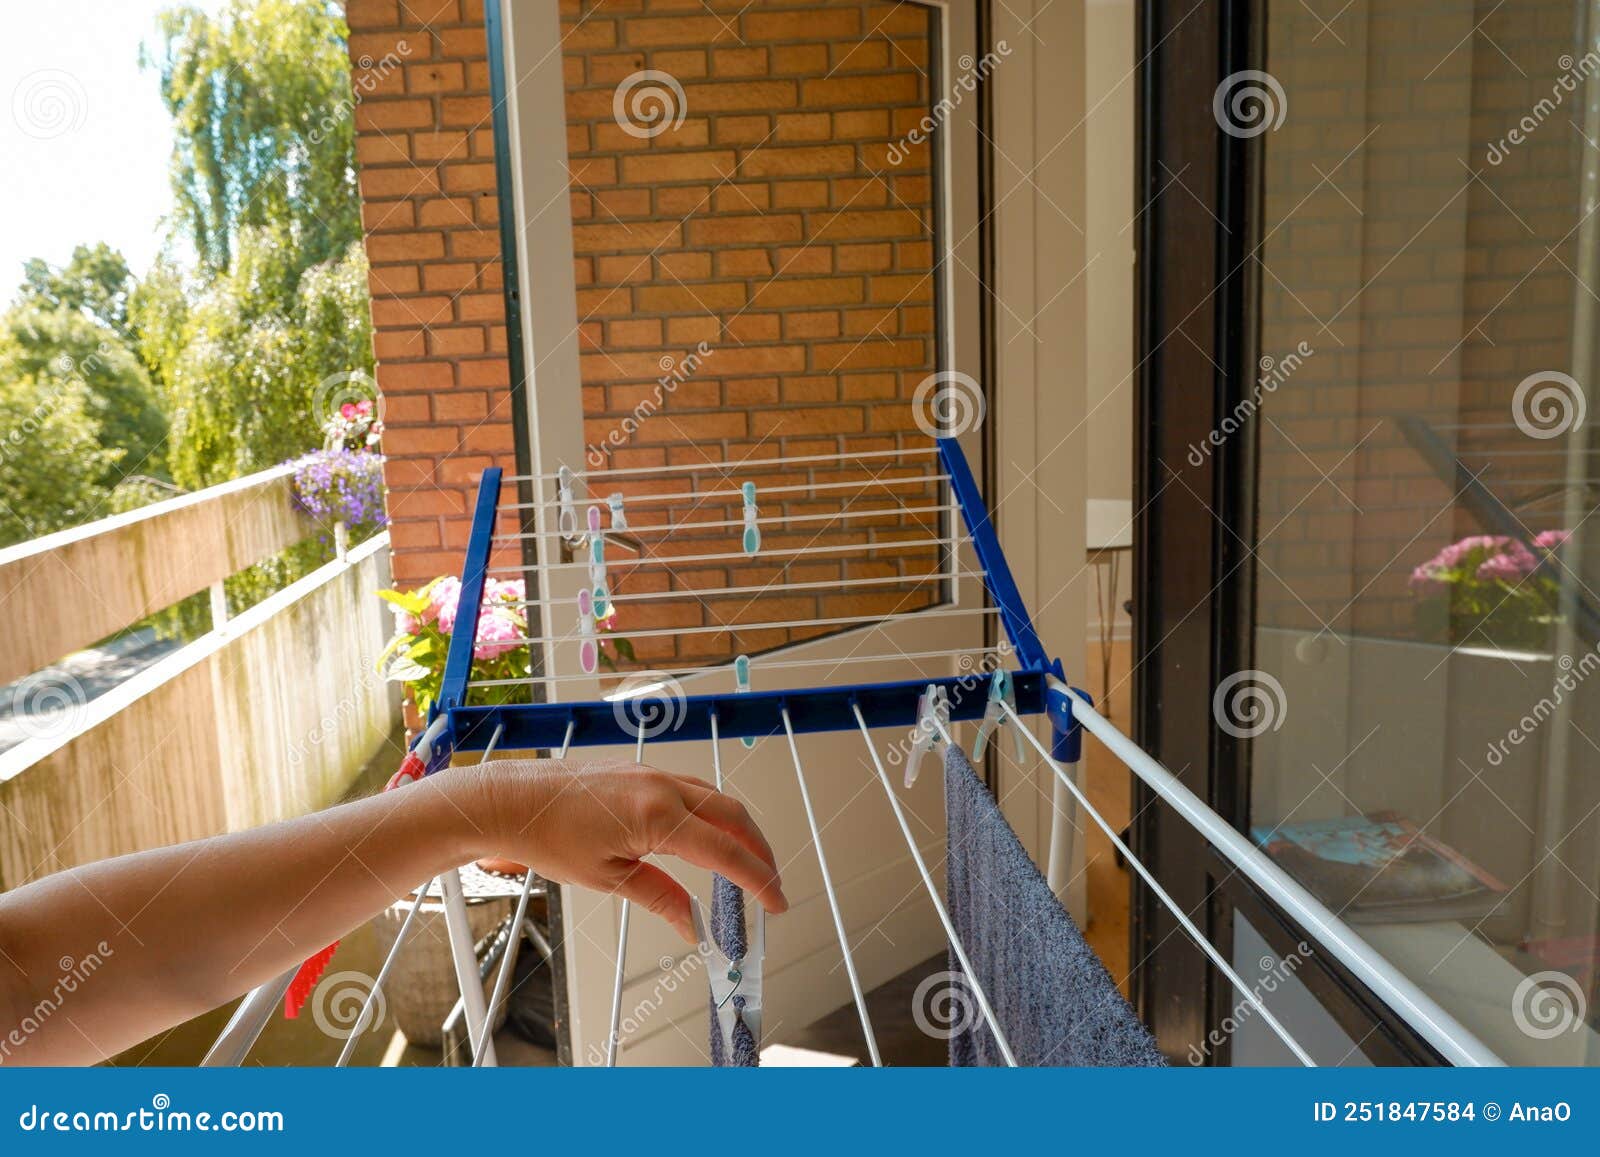 Woman Hands Hanging Her Laundry on Balcony on the Drying Rack. Female  Hanging Clothes on Clothes Line Outdoors Stock Photo - Image of laundry,  holding: 251847584